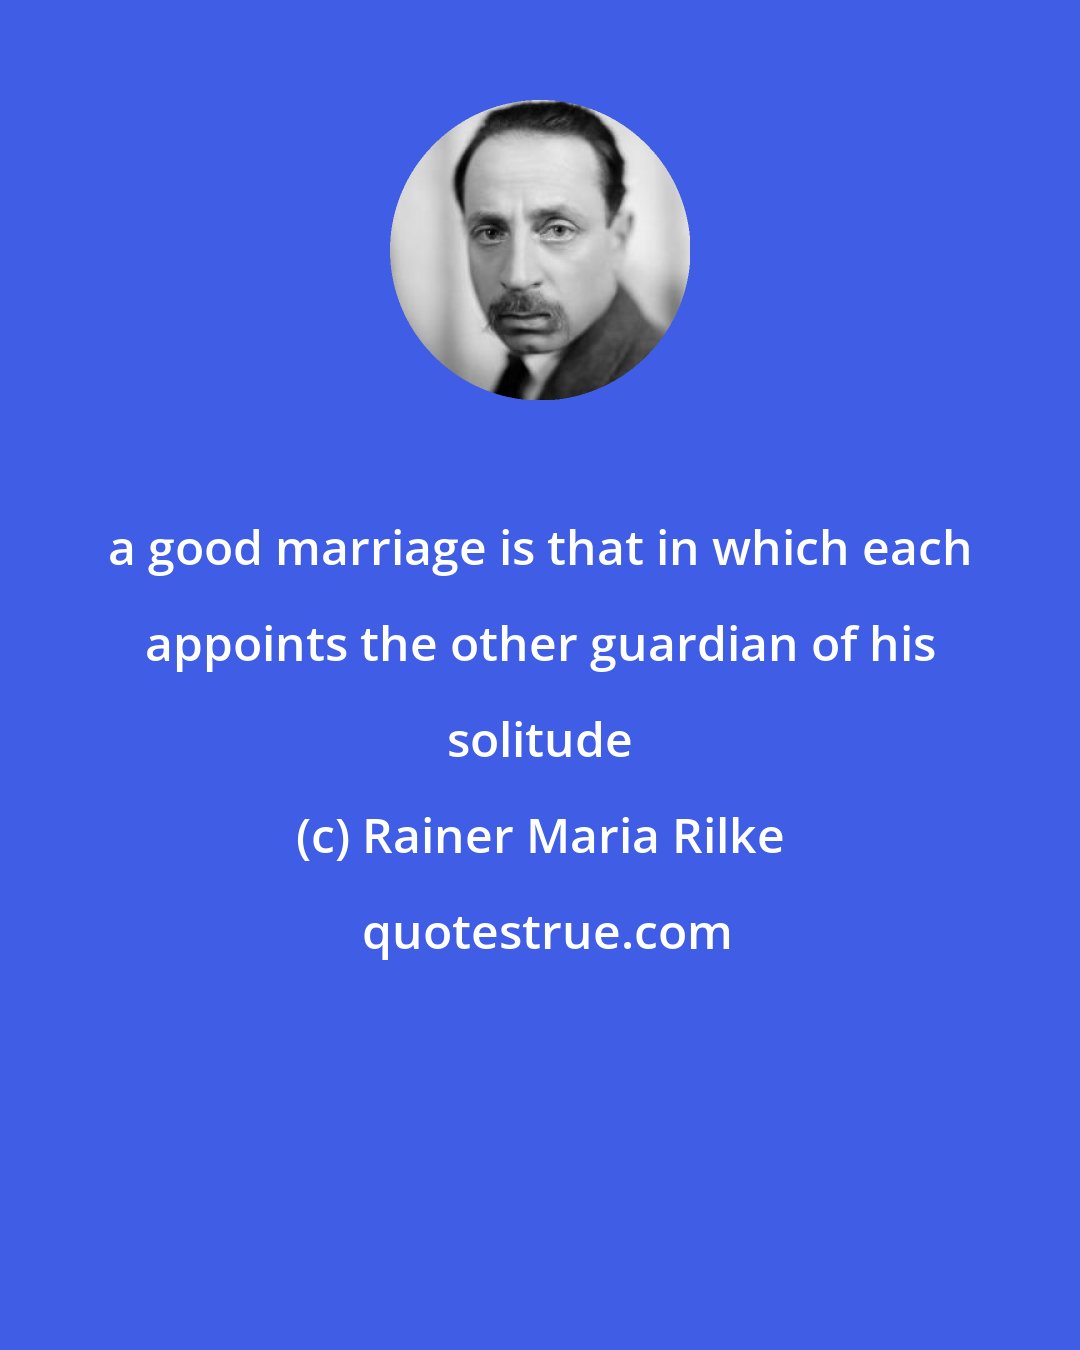 Rainer Maria Rilke: a good marriage is that in which each appoints the other guardian of his solitude